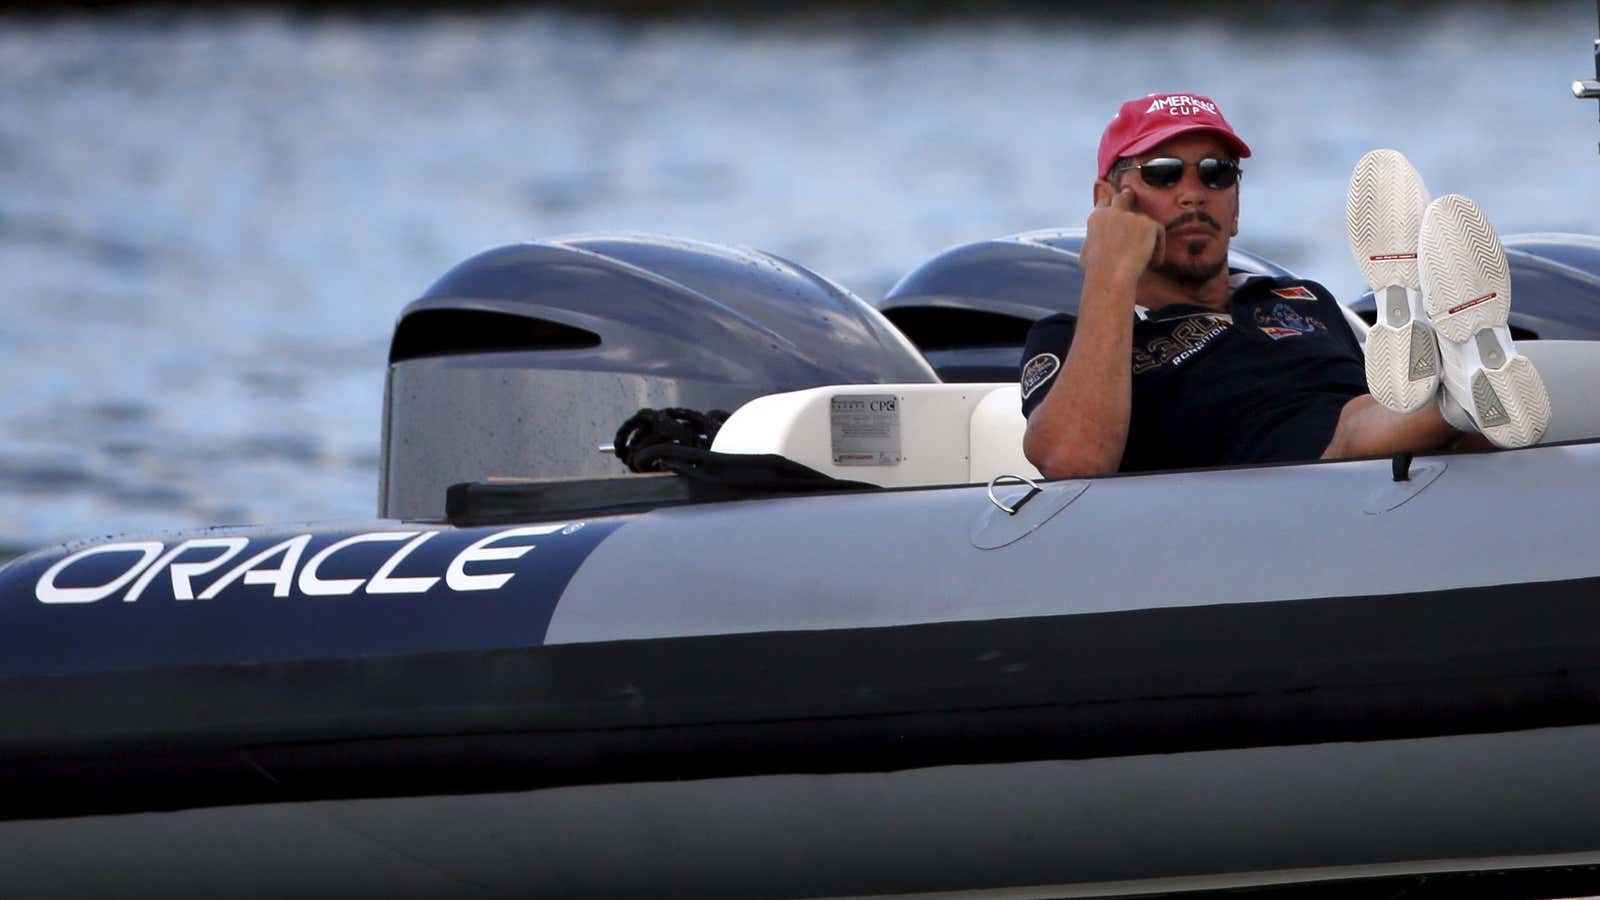 Larry Ellison reclines with his feet up in a boat, wearing sunglasses and a red cap.